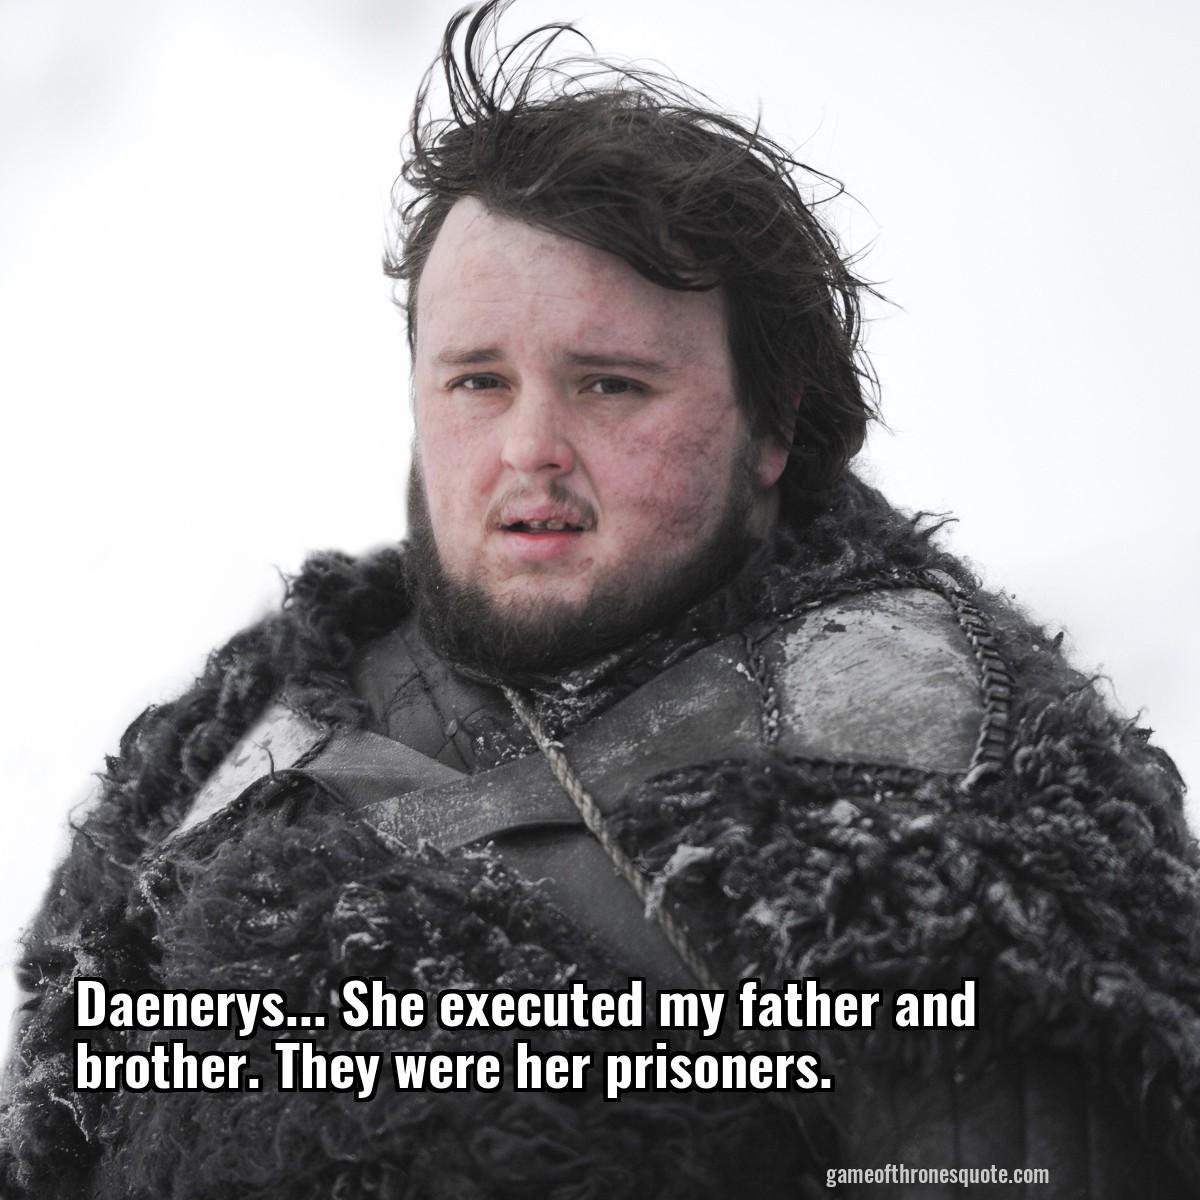 Daenerys... She executed my father and brother. They were her prisoners.